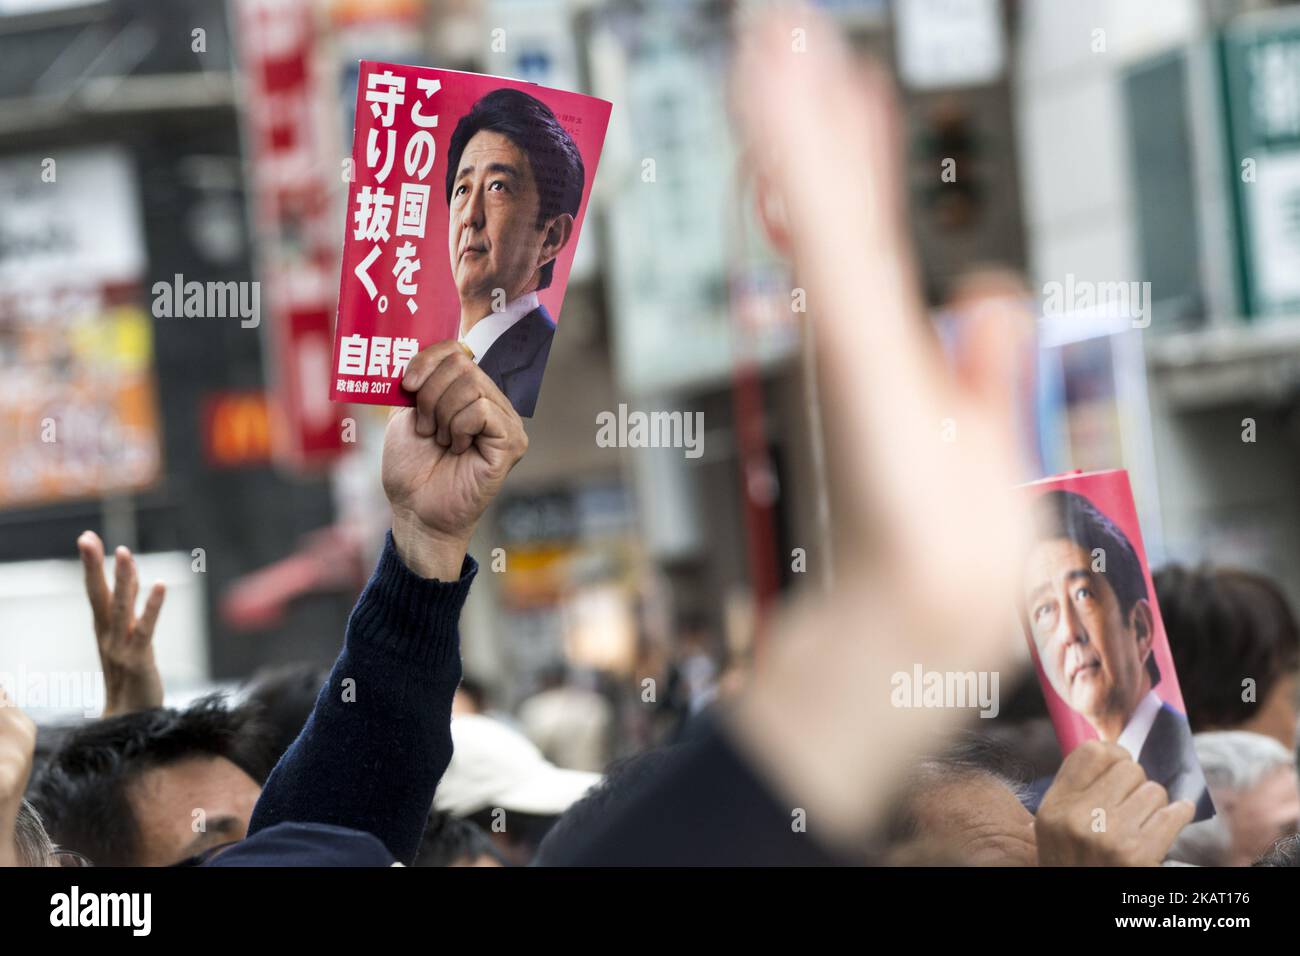 Japanese Prime Minister Shinzo Abe delivers a campaign speech for a candidate of his his ruling Liberal Democratic Party during the Lower House election campaign in Fujisawa, Kanazawa Prefecture, south of Tokyo Japan, 20 October 2017. The election will be voted on 22 October while the ruling Liberal Democratic Party coalition is facing challenge of new opposition parties form. (Photo by Alessandro Di Ciommo/NurPhoto) Stock Photo